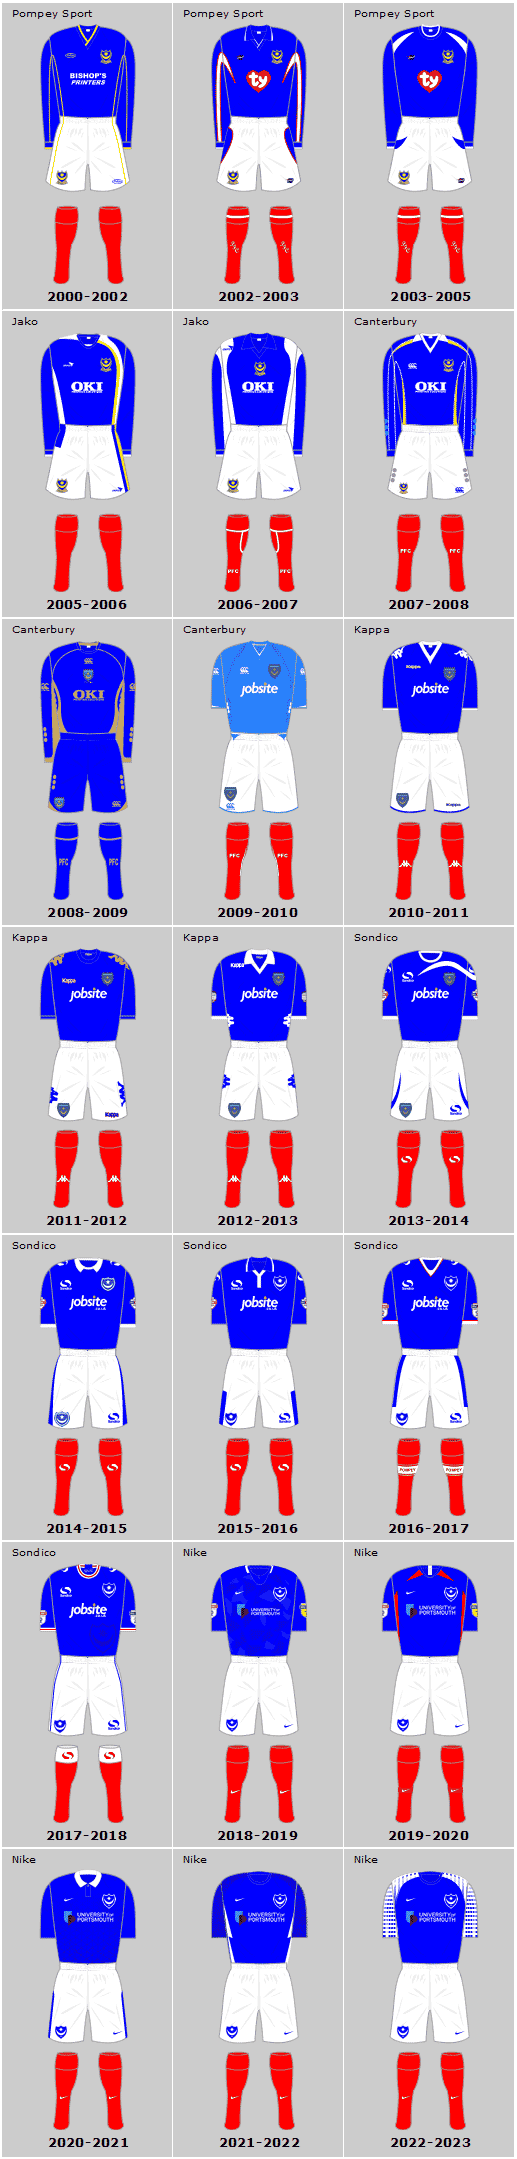 Portsmouth FC 21st Century Home Playing Kits